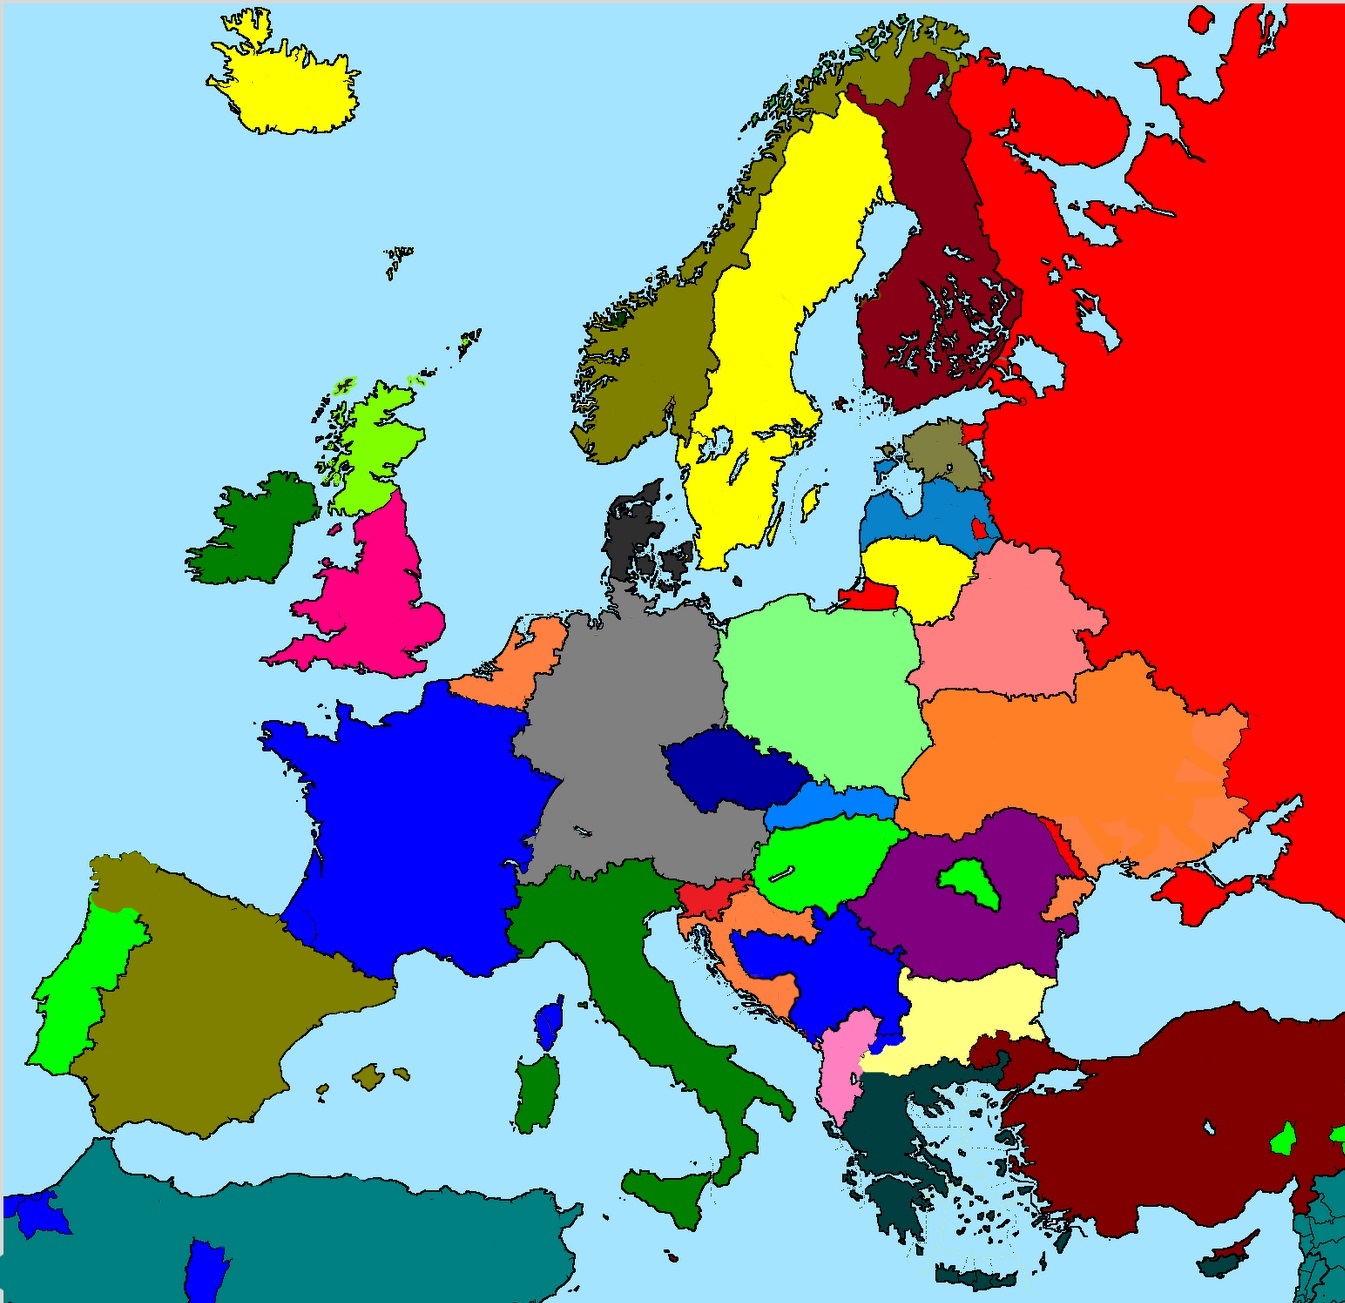 If countries in Europe were ethnically homogeneous